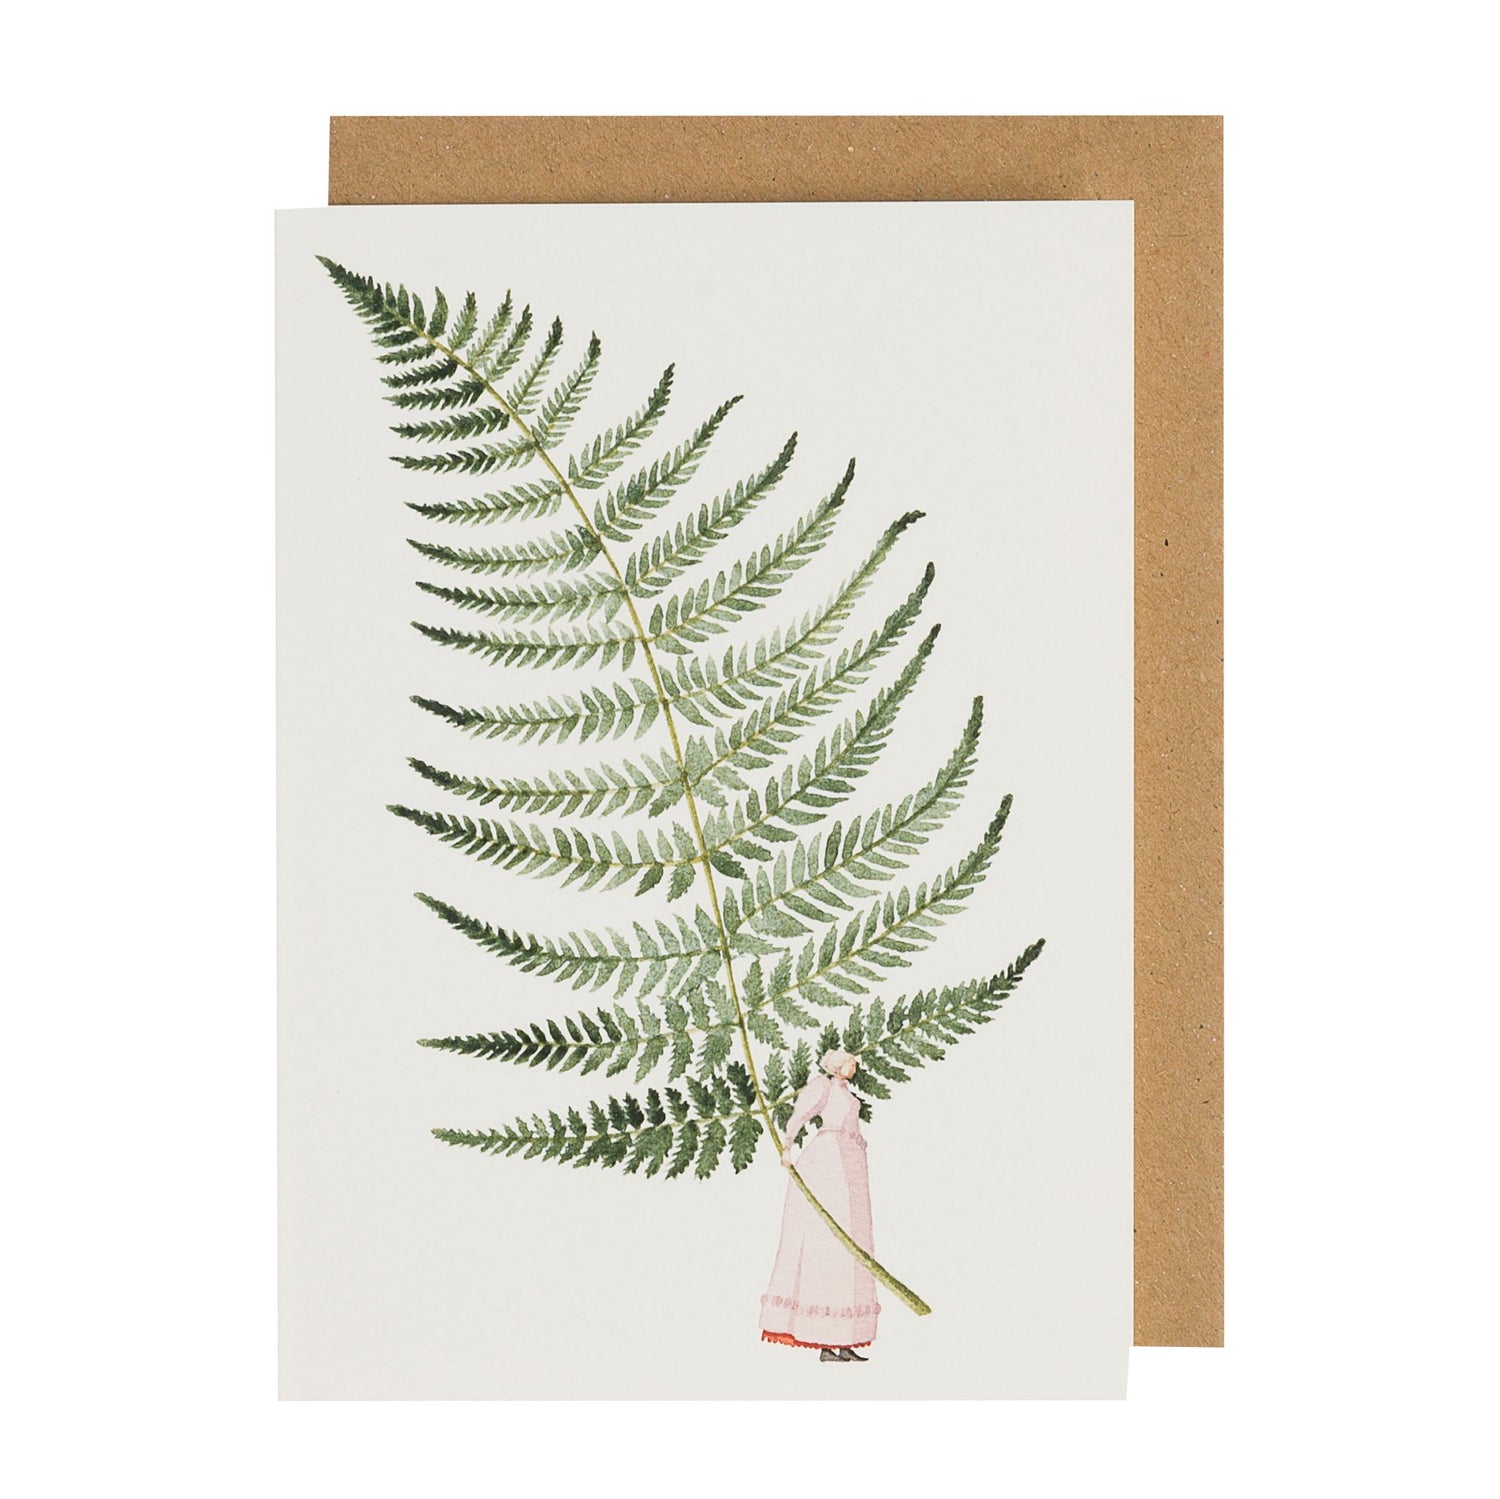 environmentally sustainable paper, compostable packaging, recycled paper, made in england, illustration, ferns